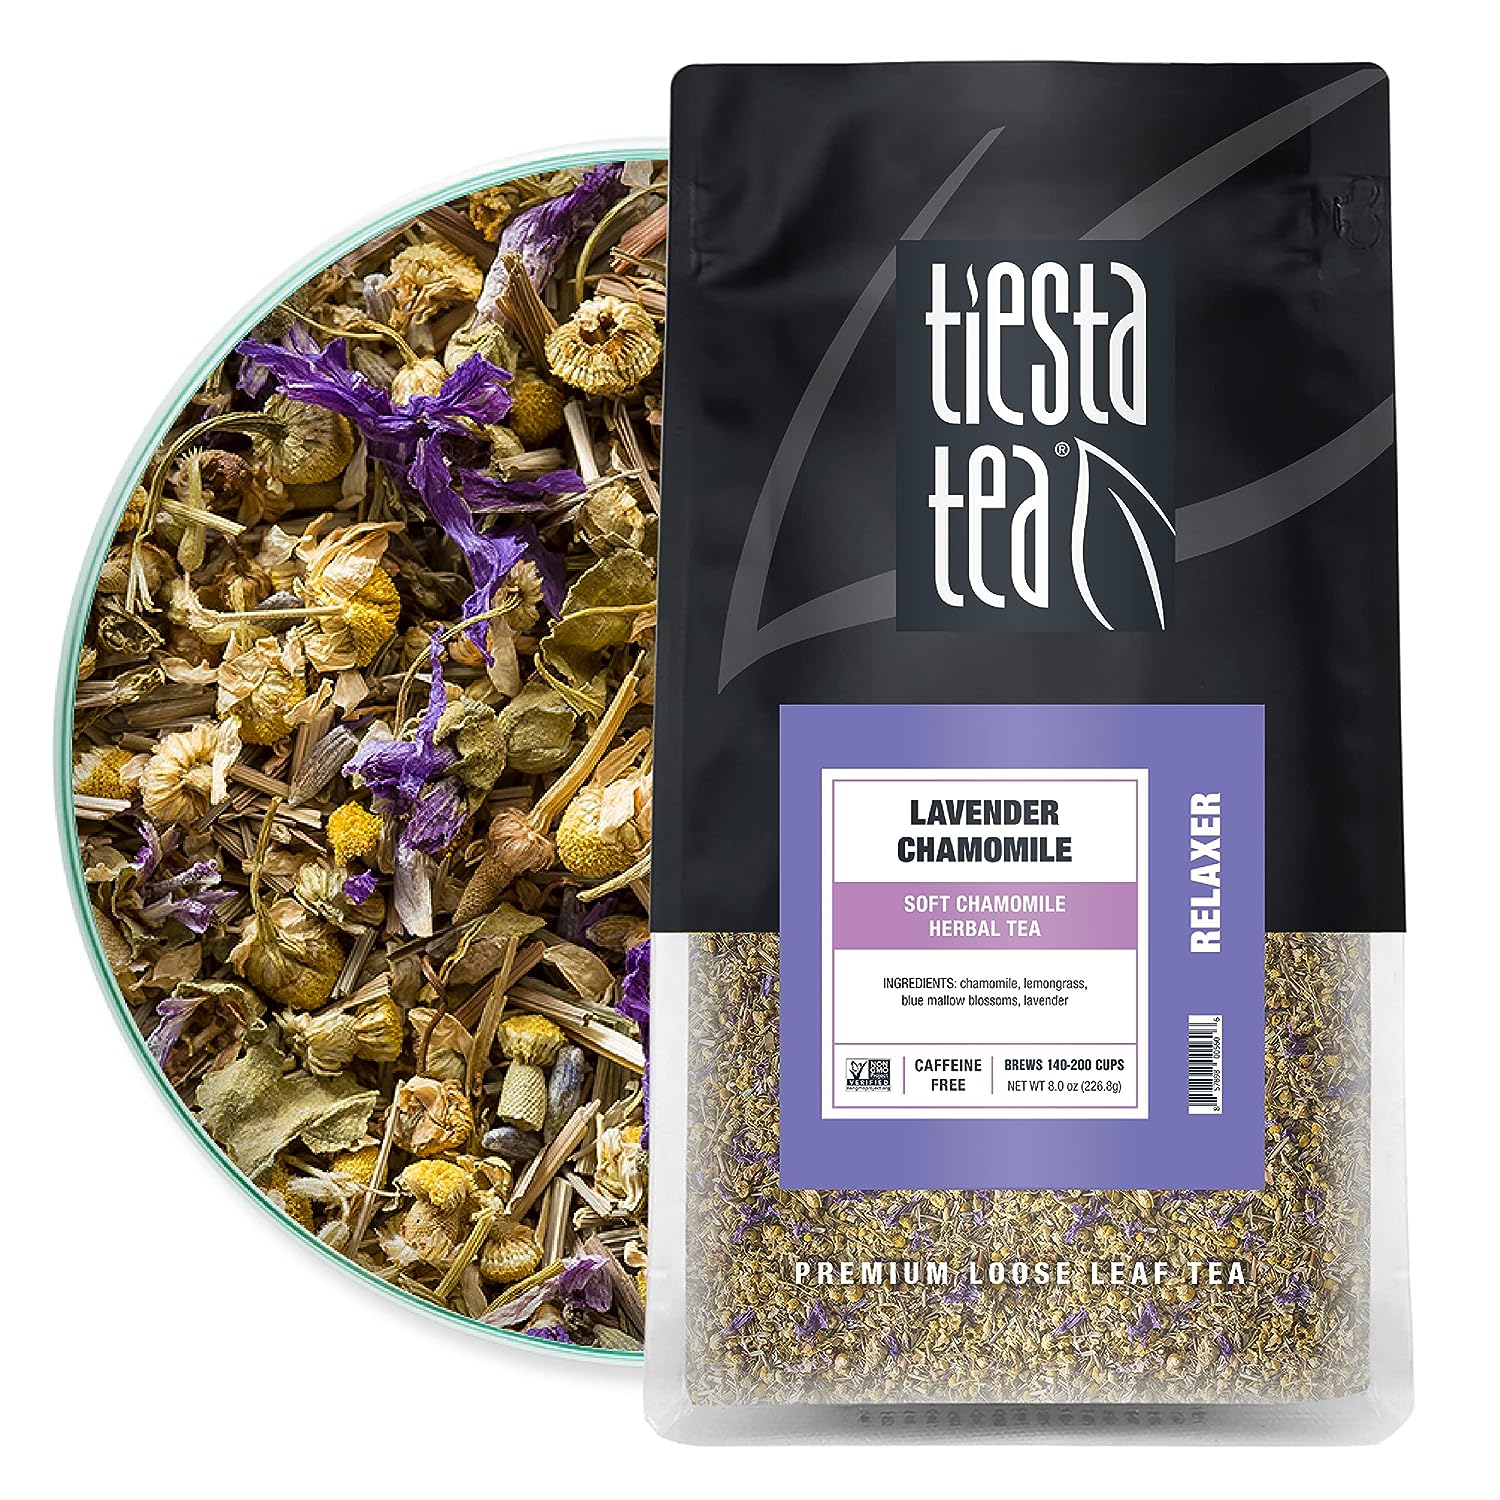 Tiesta Tea - Lavender Chamomile, Soft Chamomile Herbal Tea, Loose Leaf, Up to 200 Cups, Make Hot or Iced, Non-Caffeinated Resealable Bulk Pouch